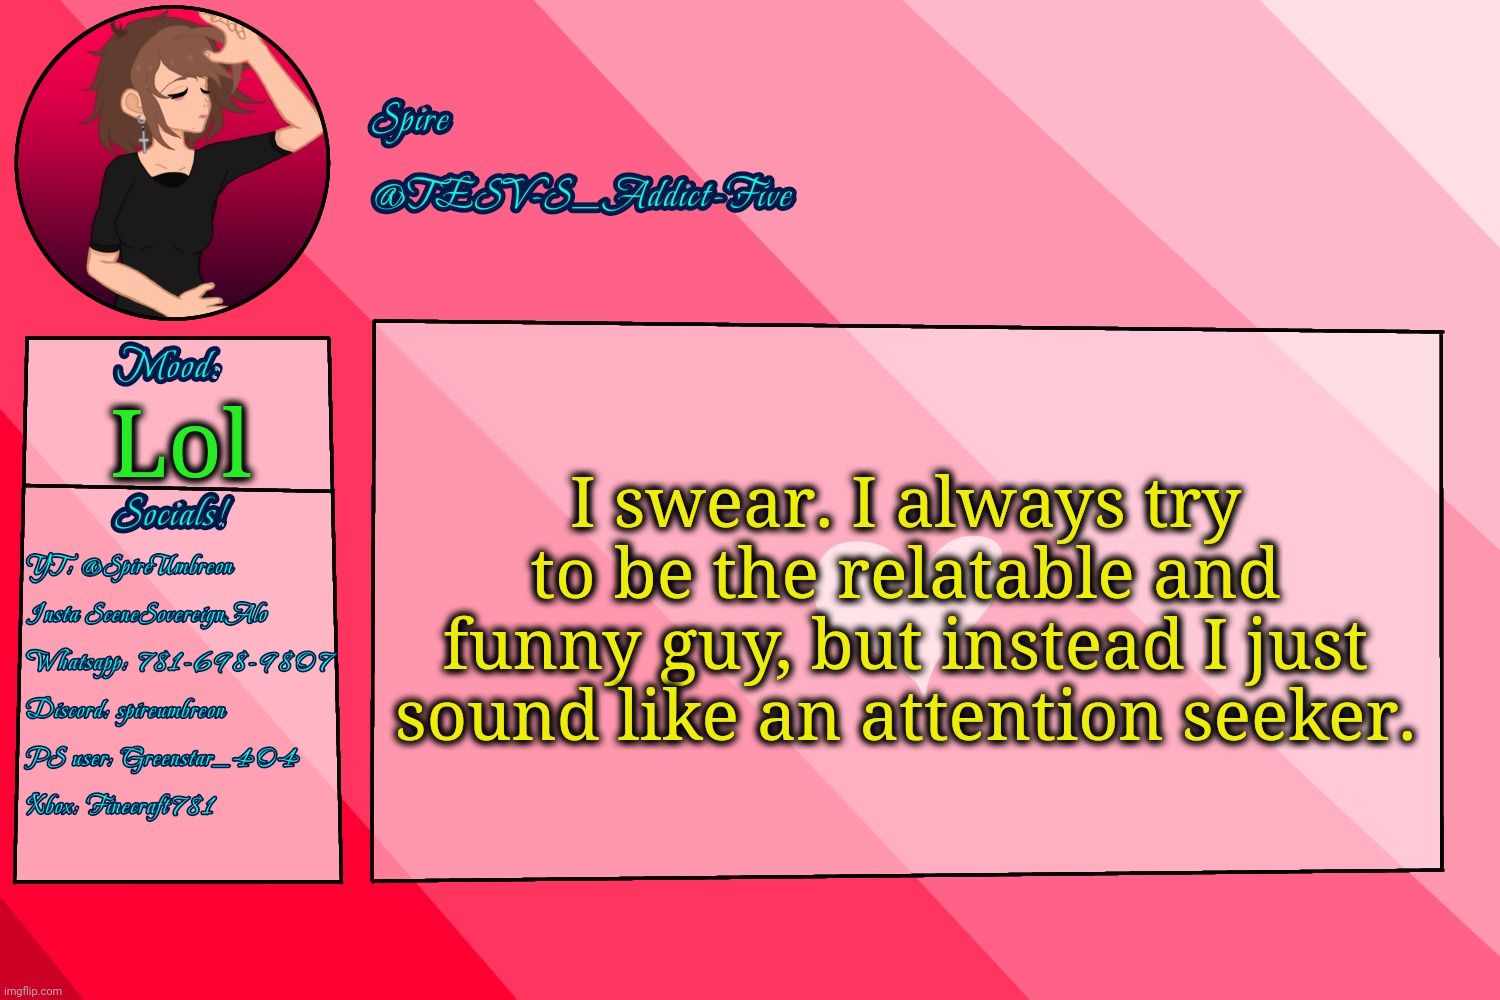 Mostly irl | I swear. I always try to be the relatable and funny guy, but instead I just sound like an attention seeker. Lol | image tagged in tesv-s_addict-five announcement template | made w/ Imgflip meme maker